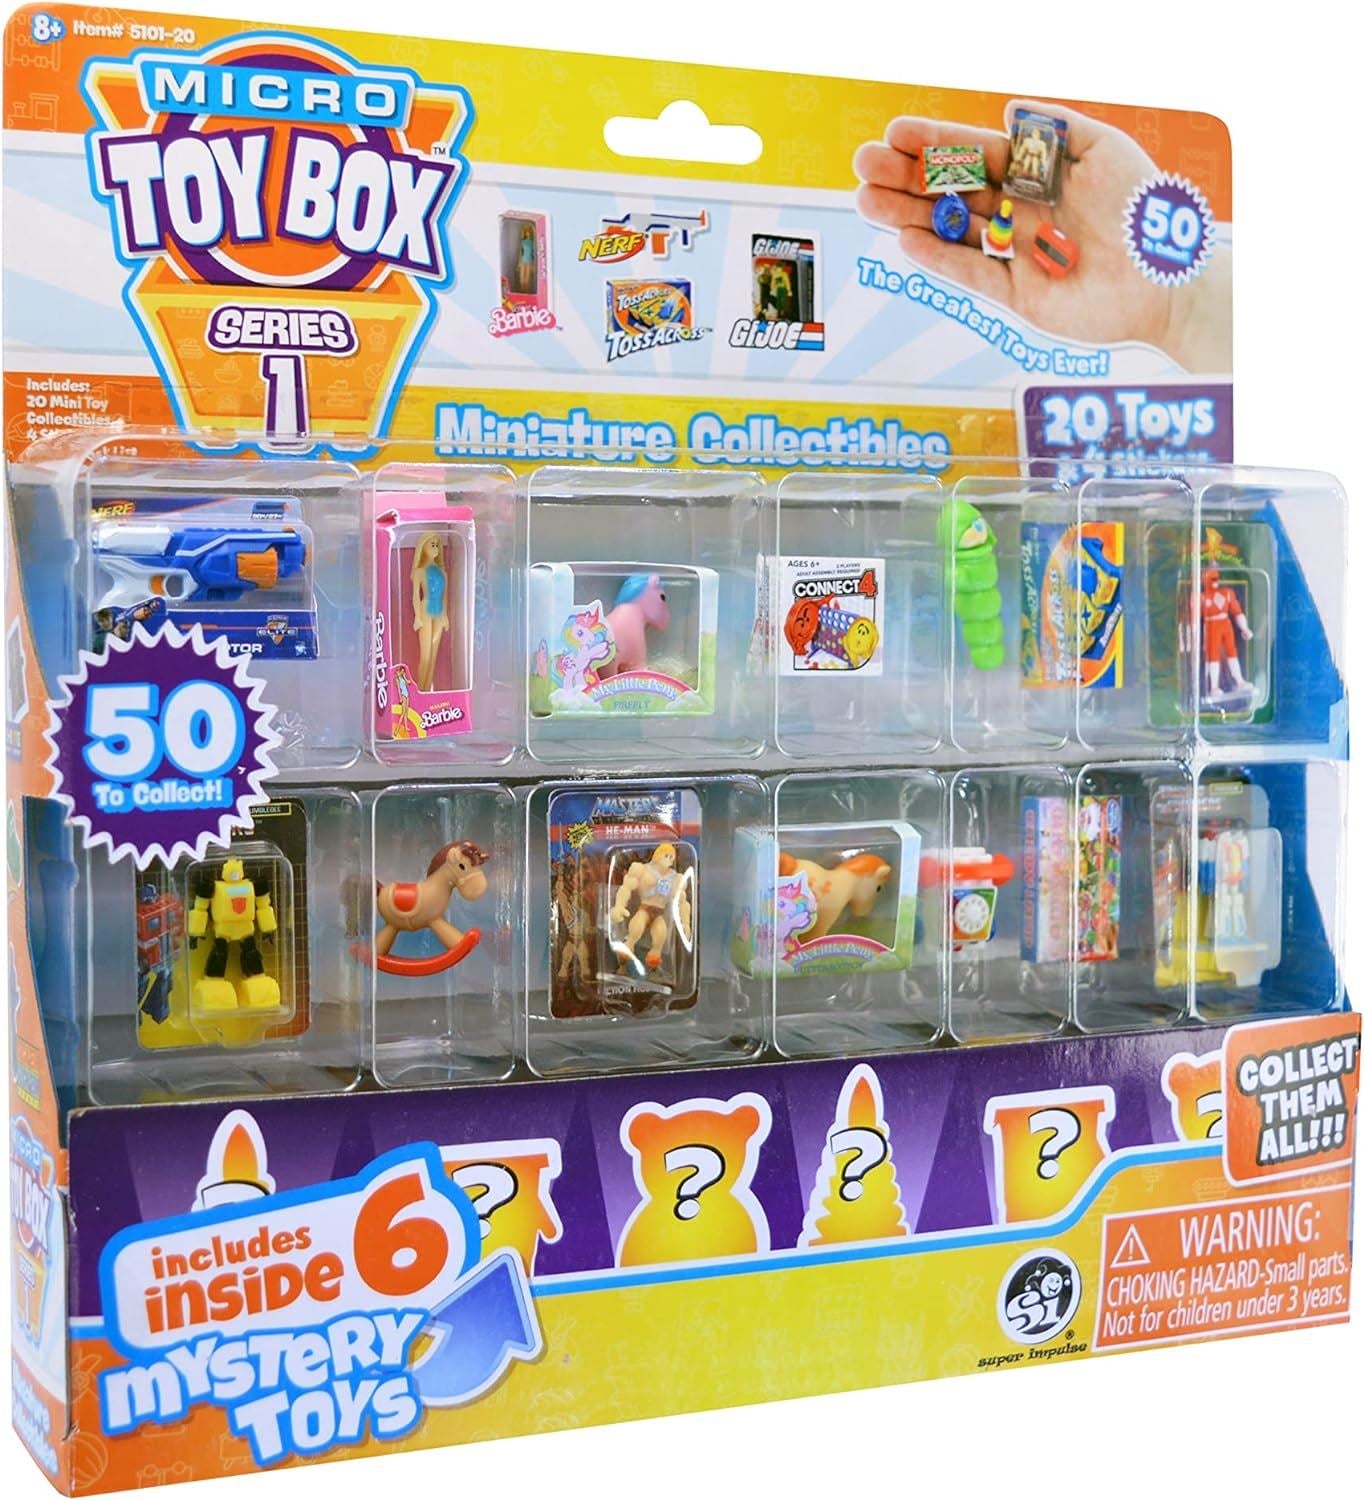 20 Pack Micro Toy Box Series 1 Mystery Pack - World's Smallest Toys